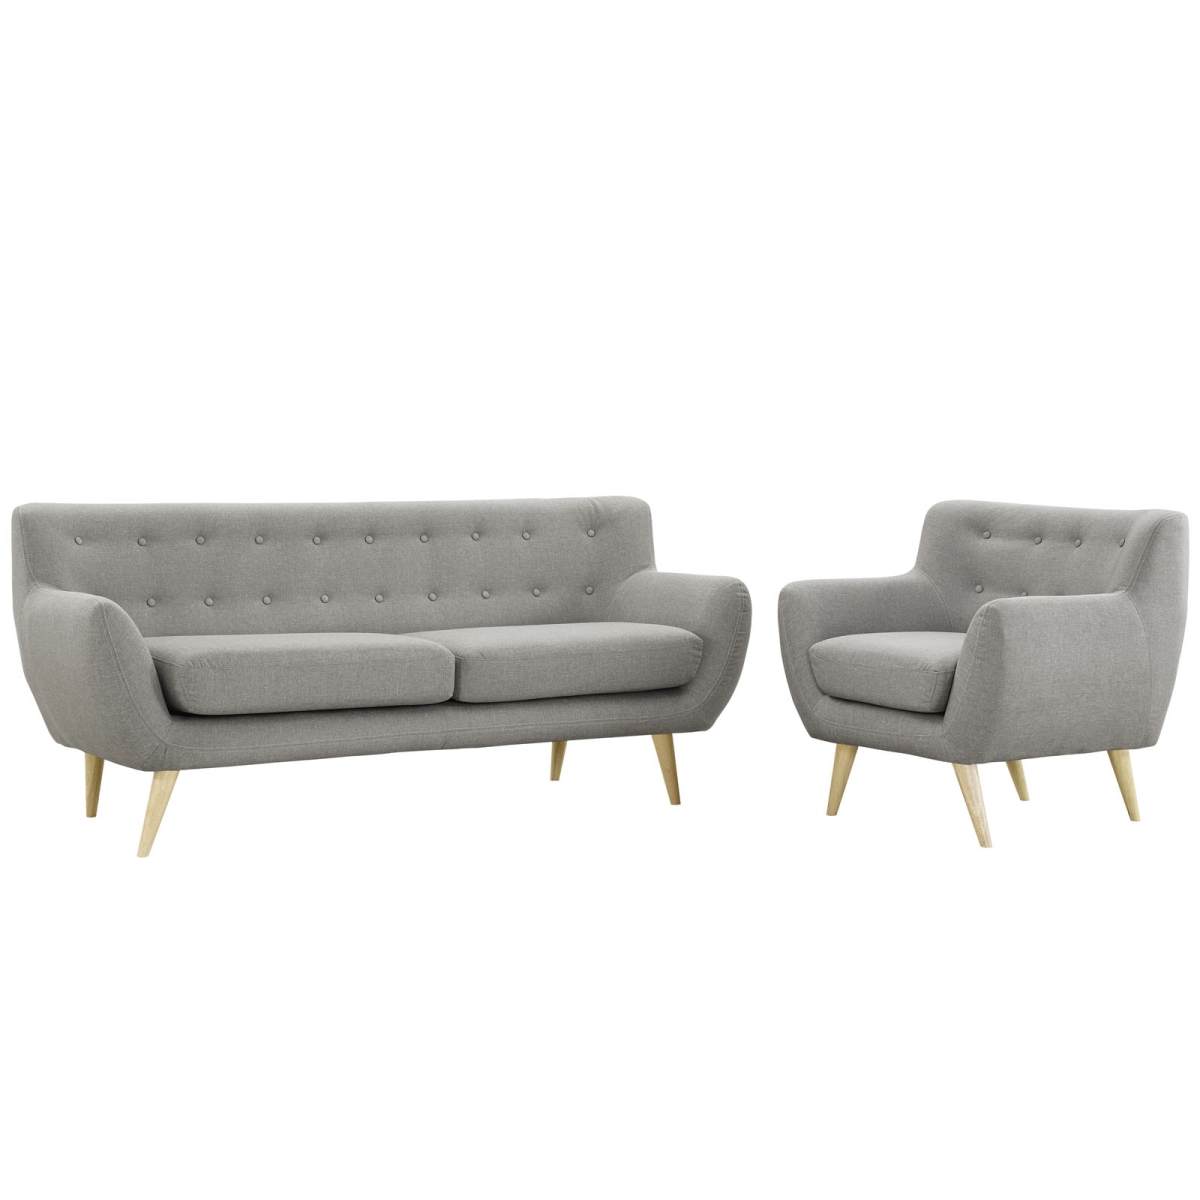 Eastend Eei-1784-lgr-set Remark Sofa & Armchair Set In Tufted Light Gray Fabric On Natural Wood Legs